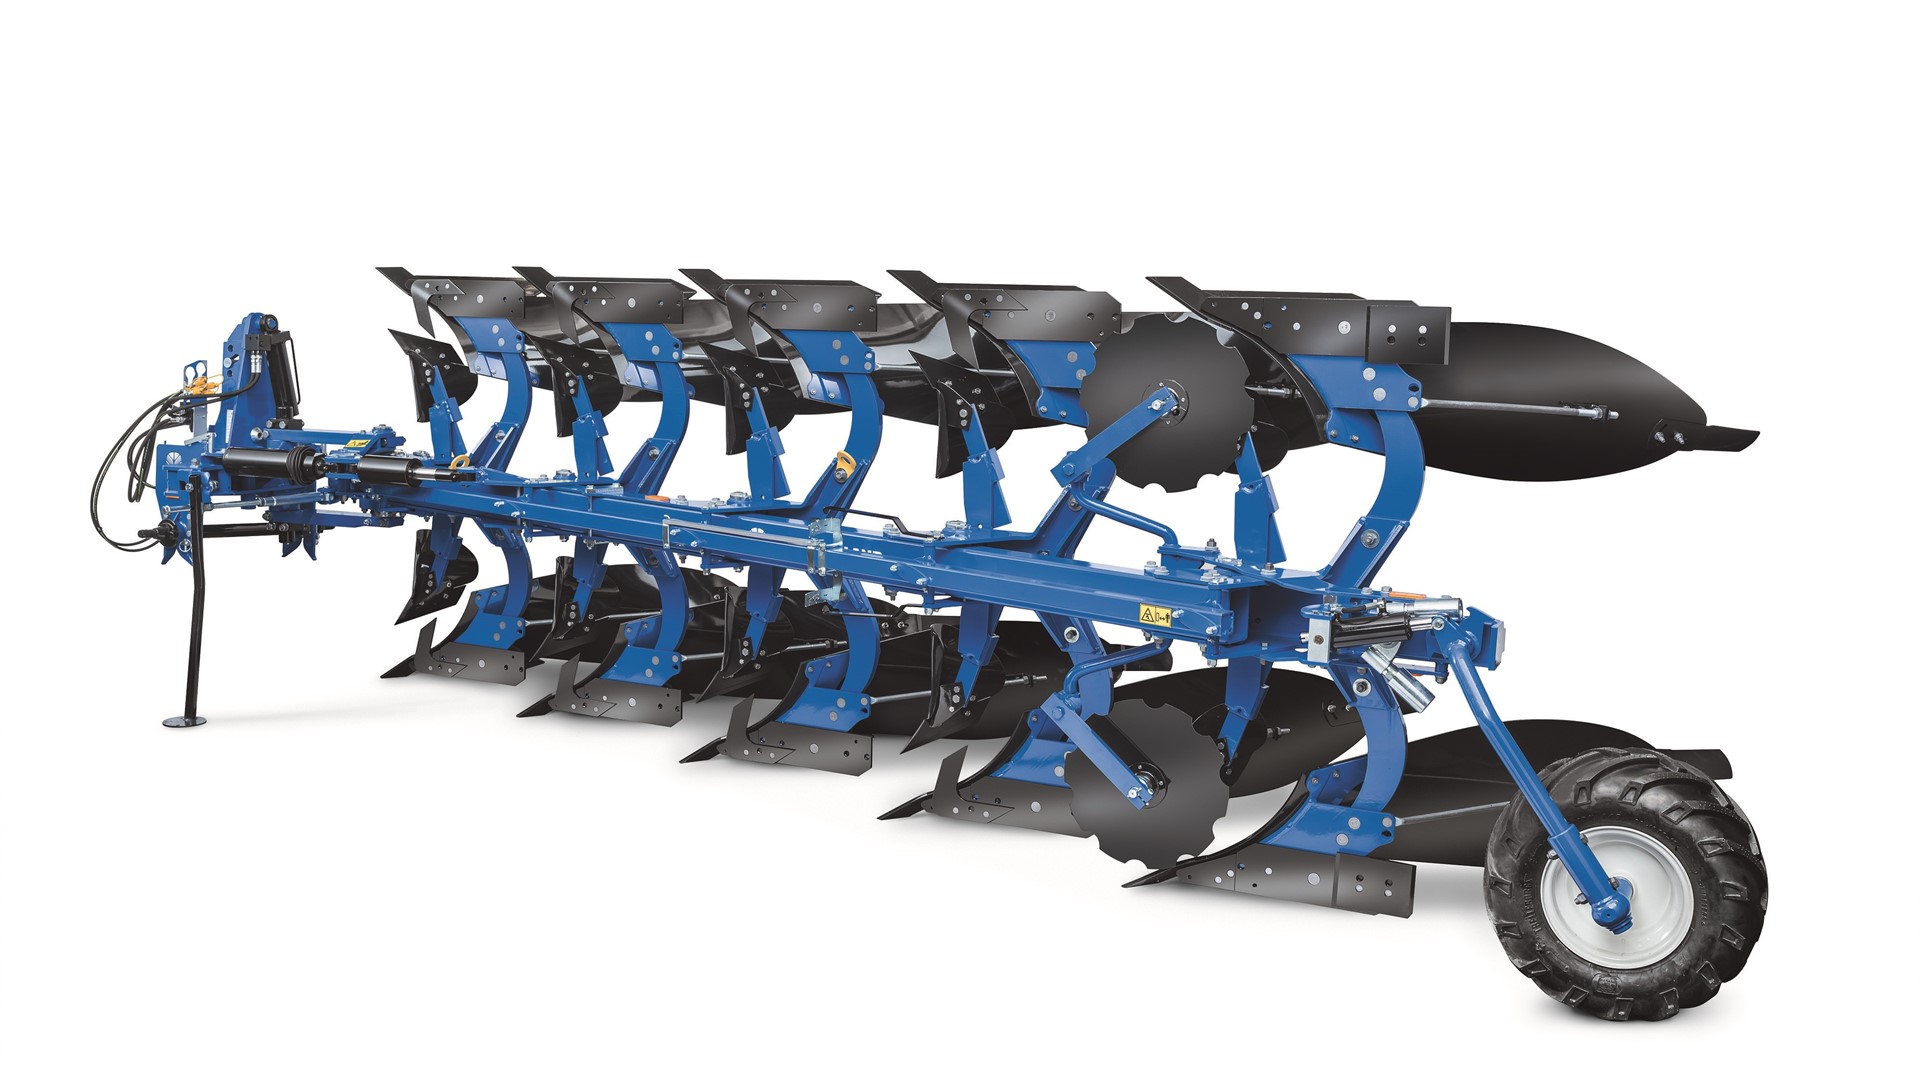 New Holland showcases its implements offering at AGRITECHNICA 2019